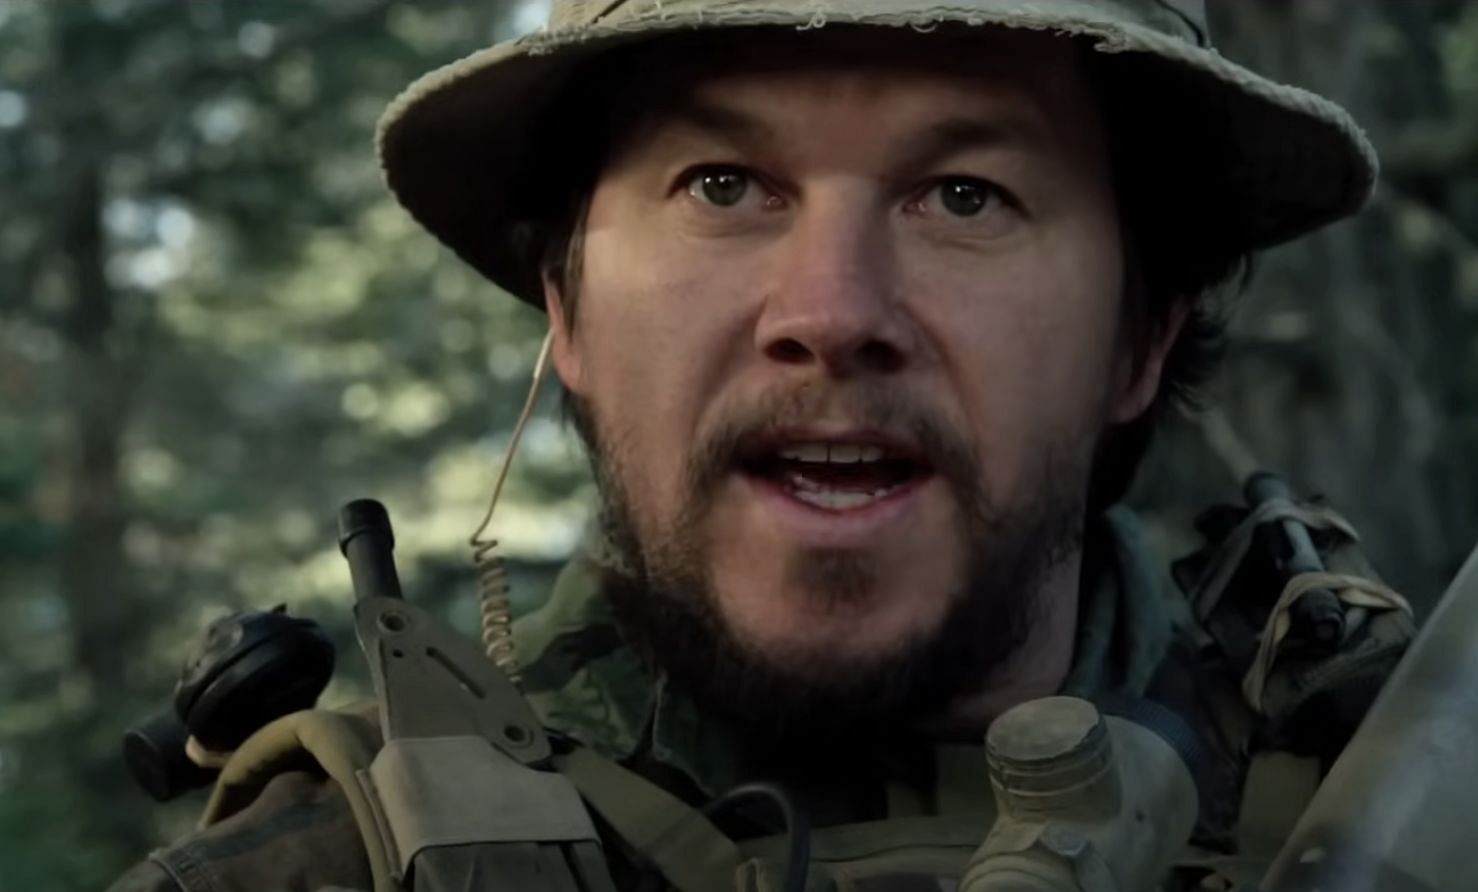 A still from the movie Lone Survivor (Image via Universal Pictures)